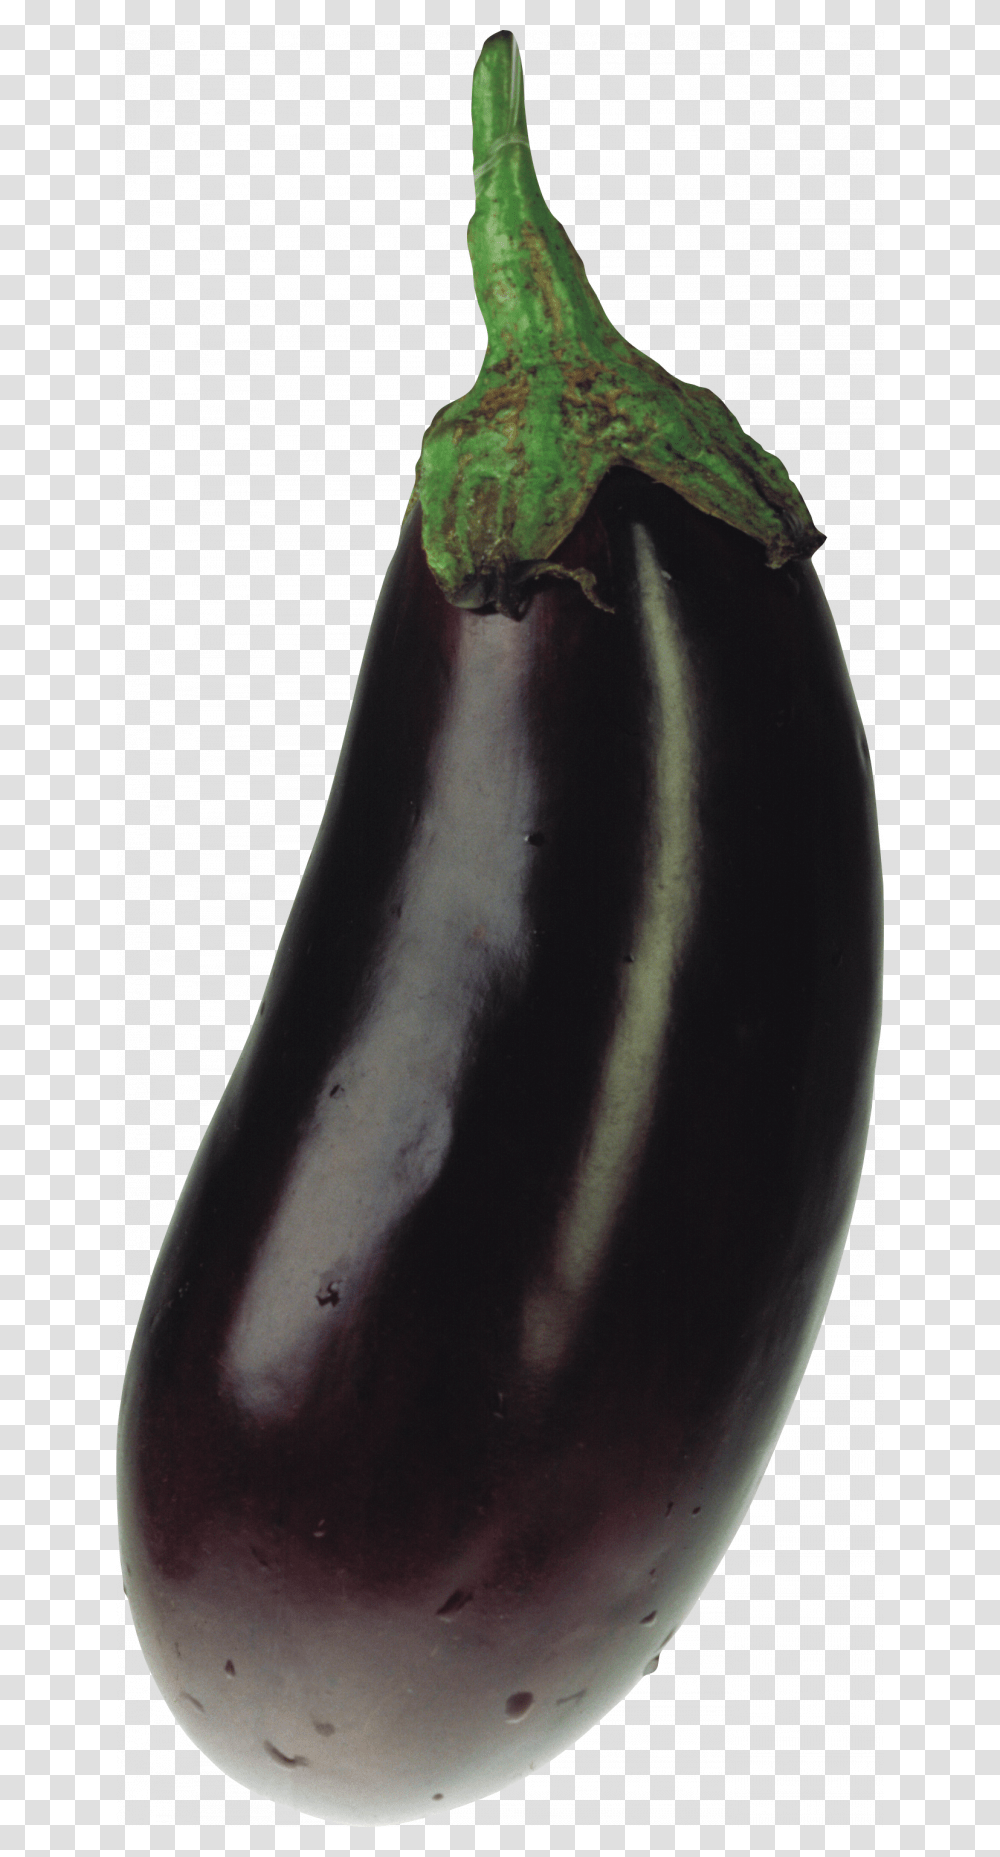 Eggplant With No Background, Vegetable, Food, Pear, Fruit Transparent Png